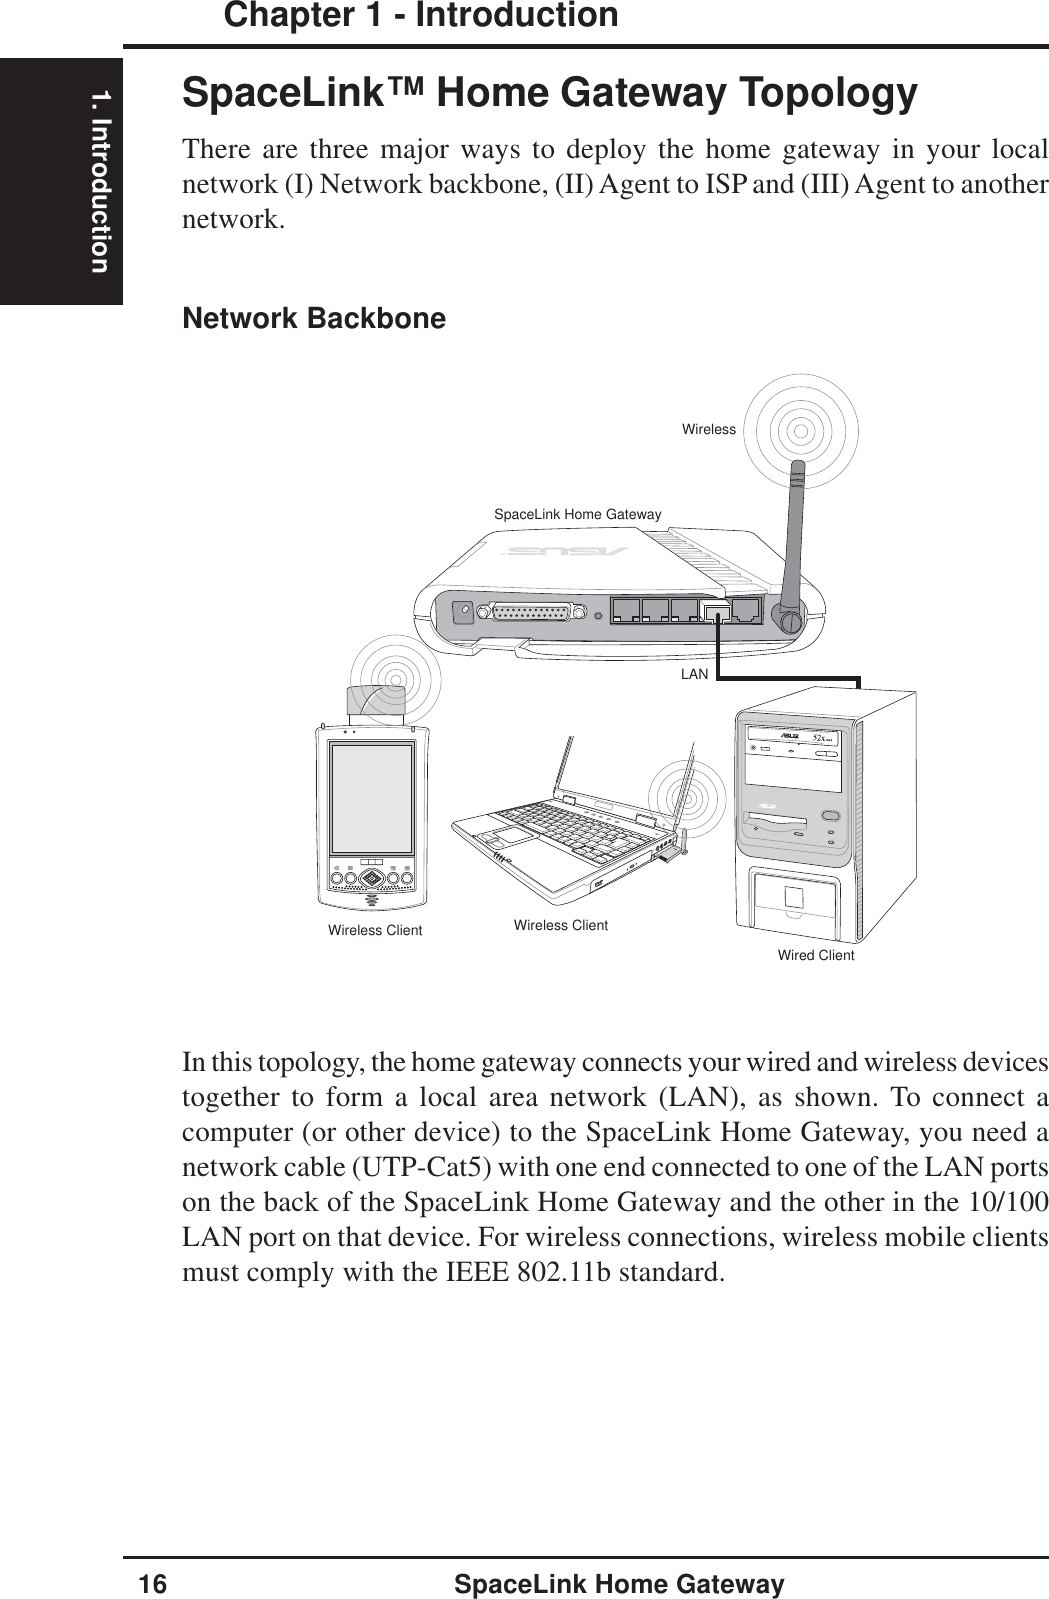 1. IntroductionChapter 1 - Introduction16 SpaceLink Home GatewayWired ClientWireless ClientWireless ClientSpaceLink Home GatewayWirelessLANSpaceLink™ Home Gateway TopologyThere are three major ways to deploy the home gateway in your localnetwork (I) Network backbone, (II) Agent to ISP and (III) Agent to anothernetwork.In this topology, the home gateway connects your wired and wireless devicestogether to form a local area network (LAN), as shown. To connect acomputer (or other device) to the SpaceLink Home Gateway, you need anetwork cable (UTP-Cat5) with one end connected to one of the LAN portson the back of the SpaceLink Home Gateway and the other in the 10/100LAN port on that device. For wireless connections, wireless mobile clientsmust comply with the IEEE 802.11b standard.Network Backbone